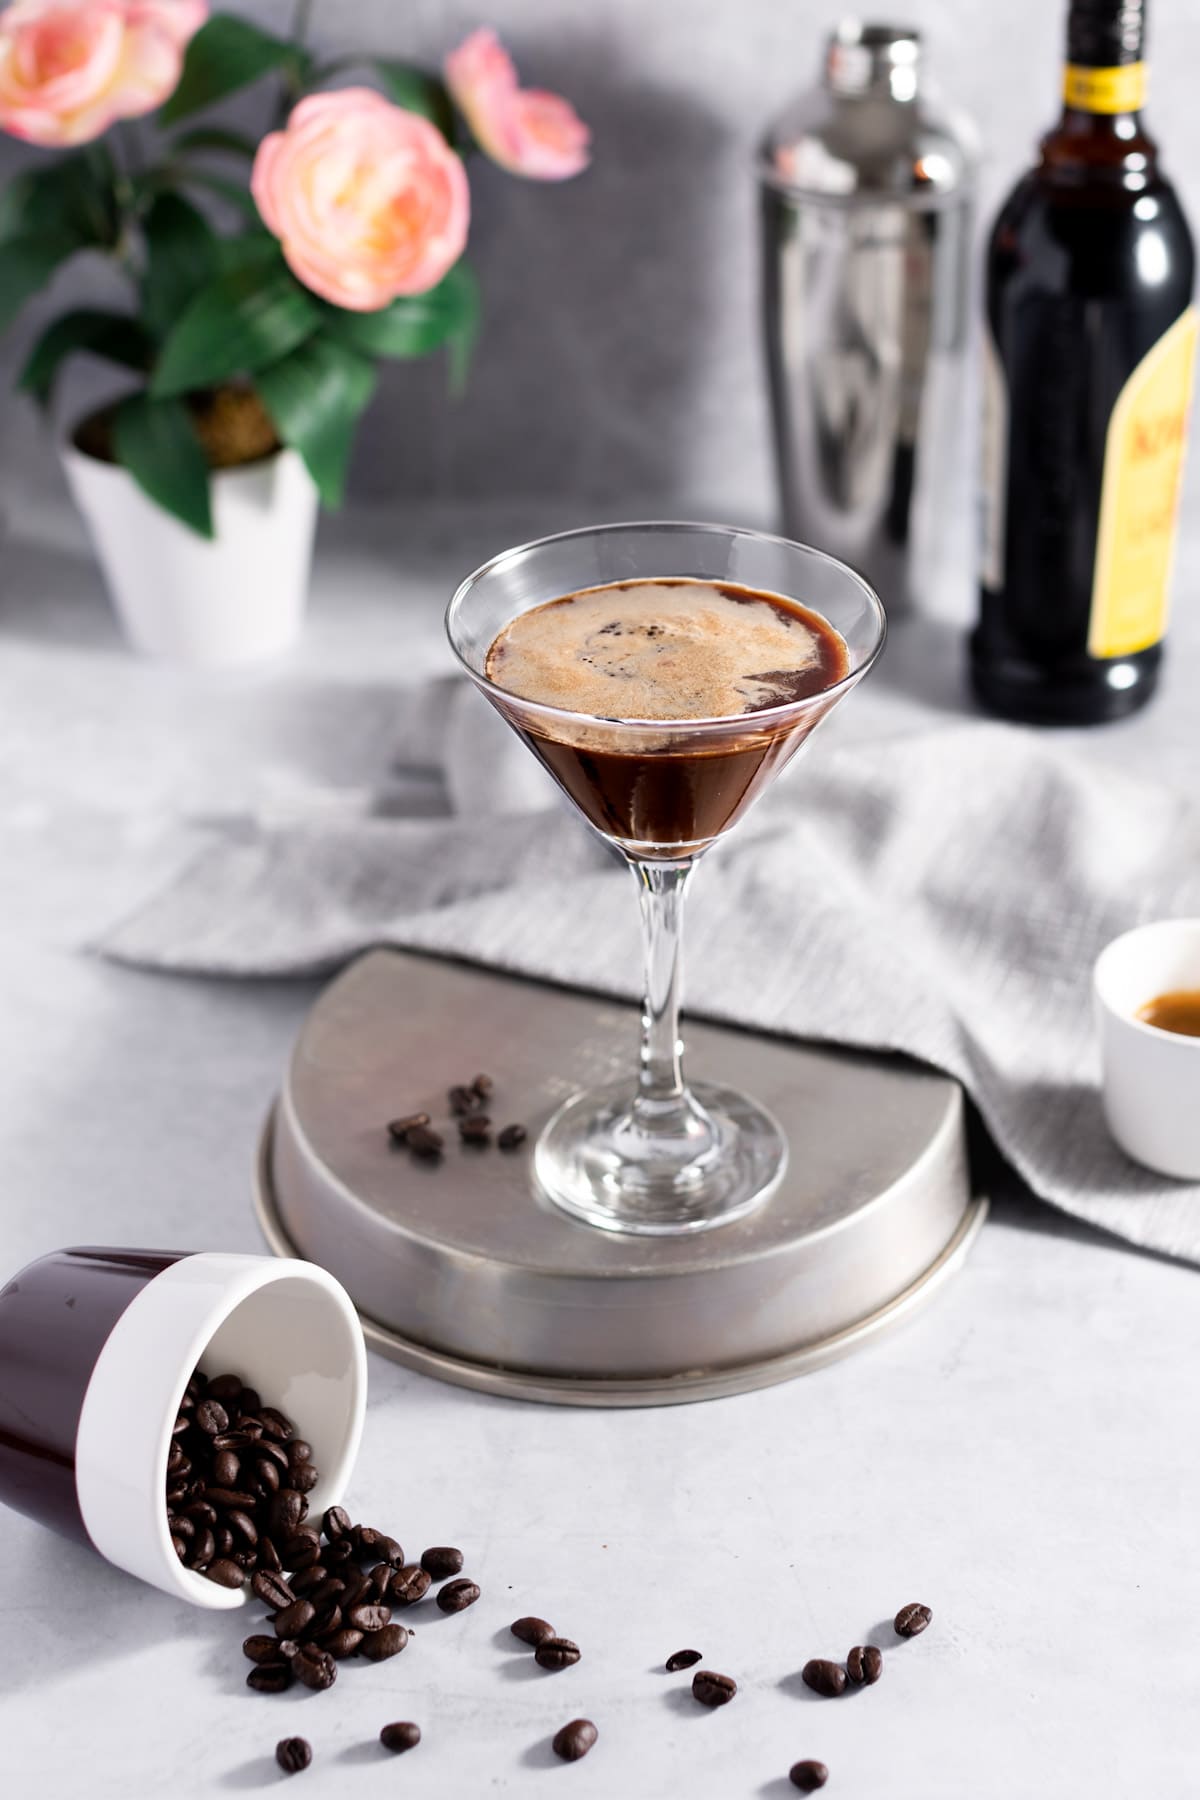 A martini sitting on a flipped over round metal tin, next to a cup of spilled coffee beans, with pink flowers, a cocktail shaker and bottle of kahlua in the background.